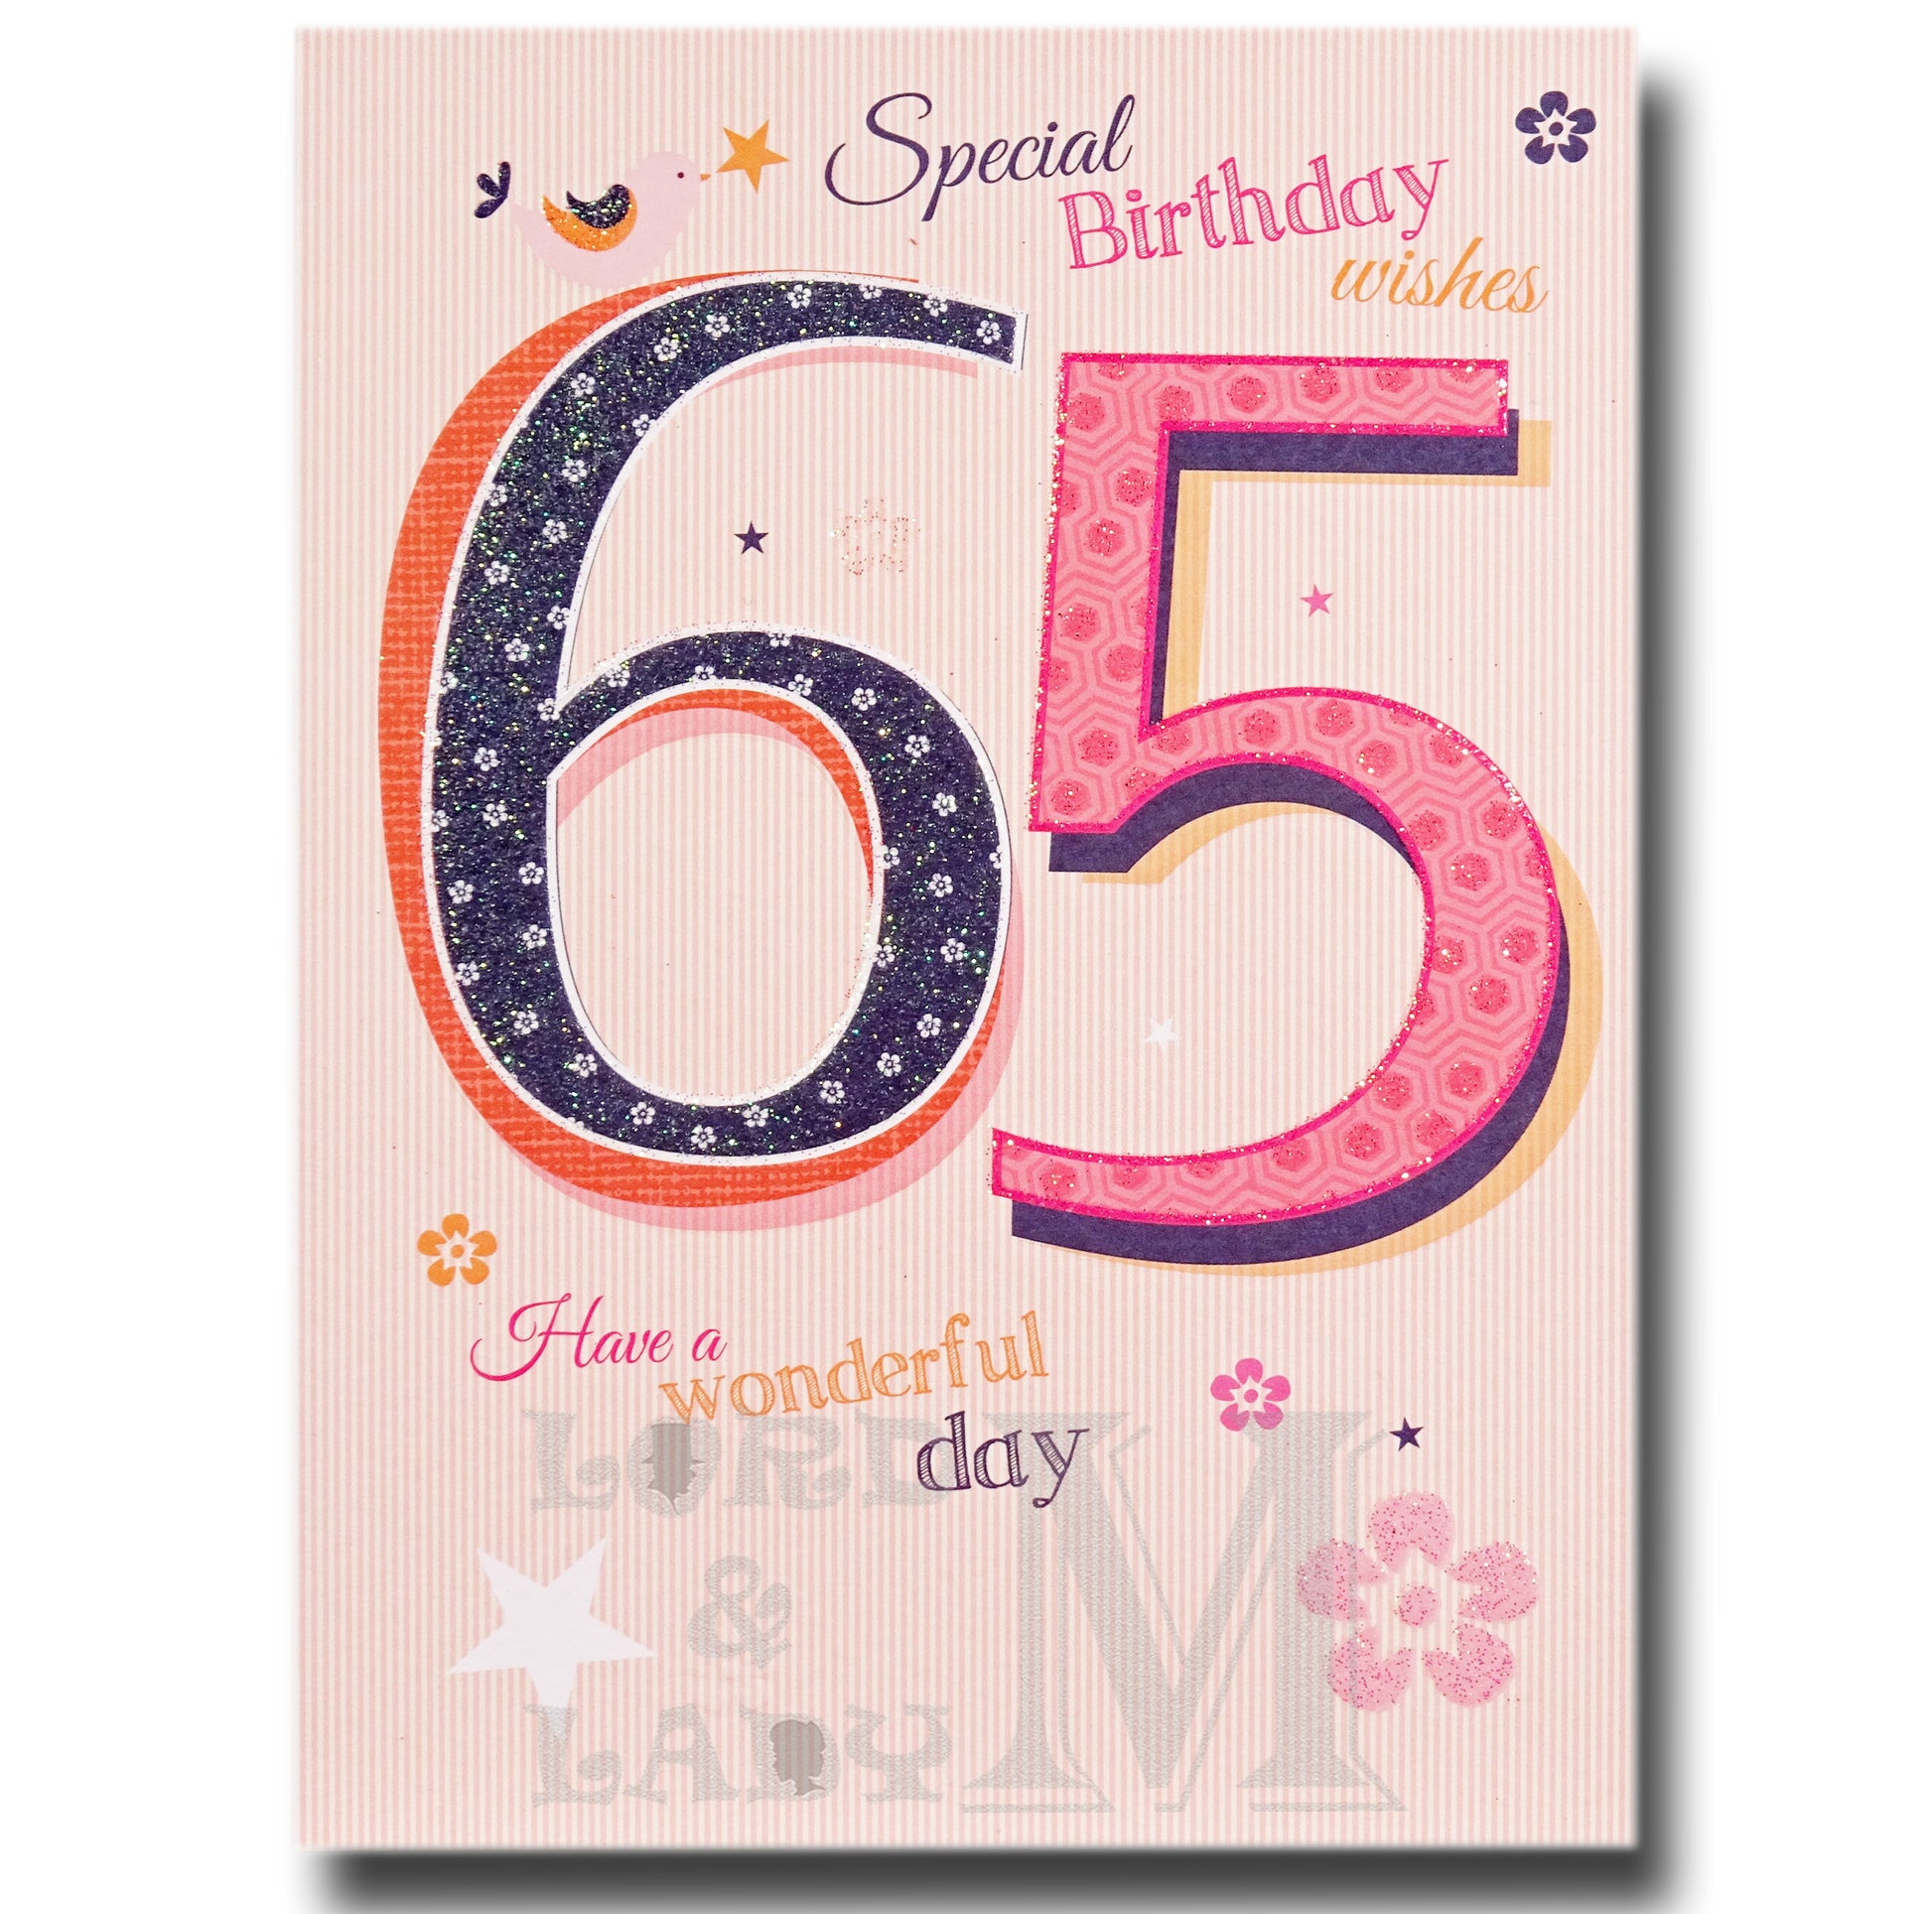 17cm - Special Birthday Wishes 65 Have A ... - OH